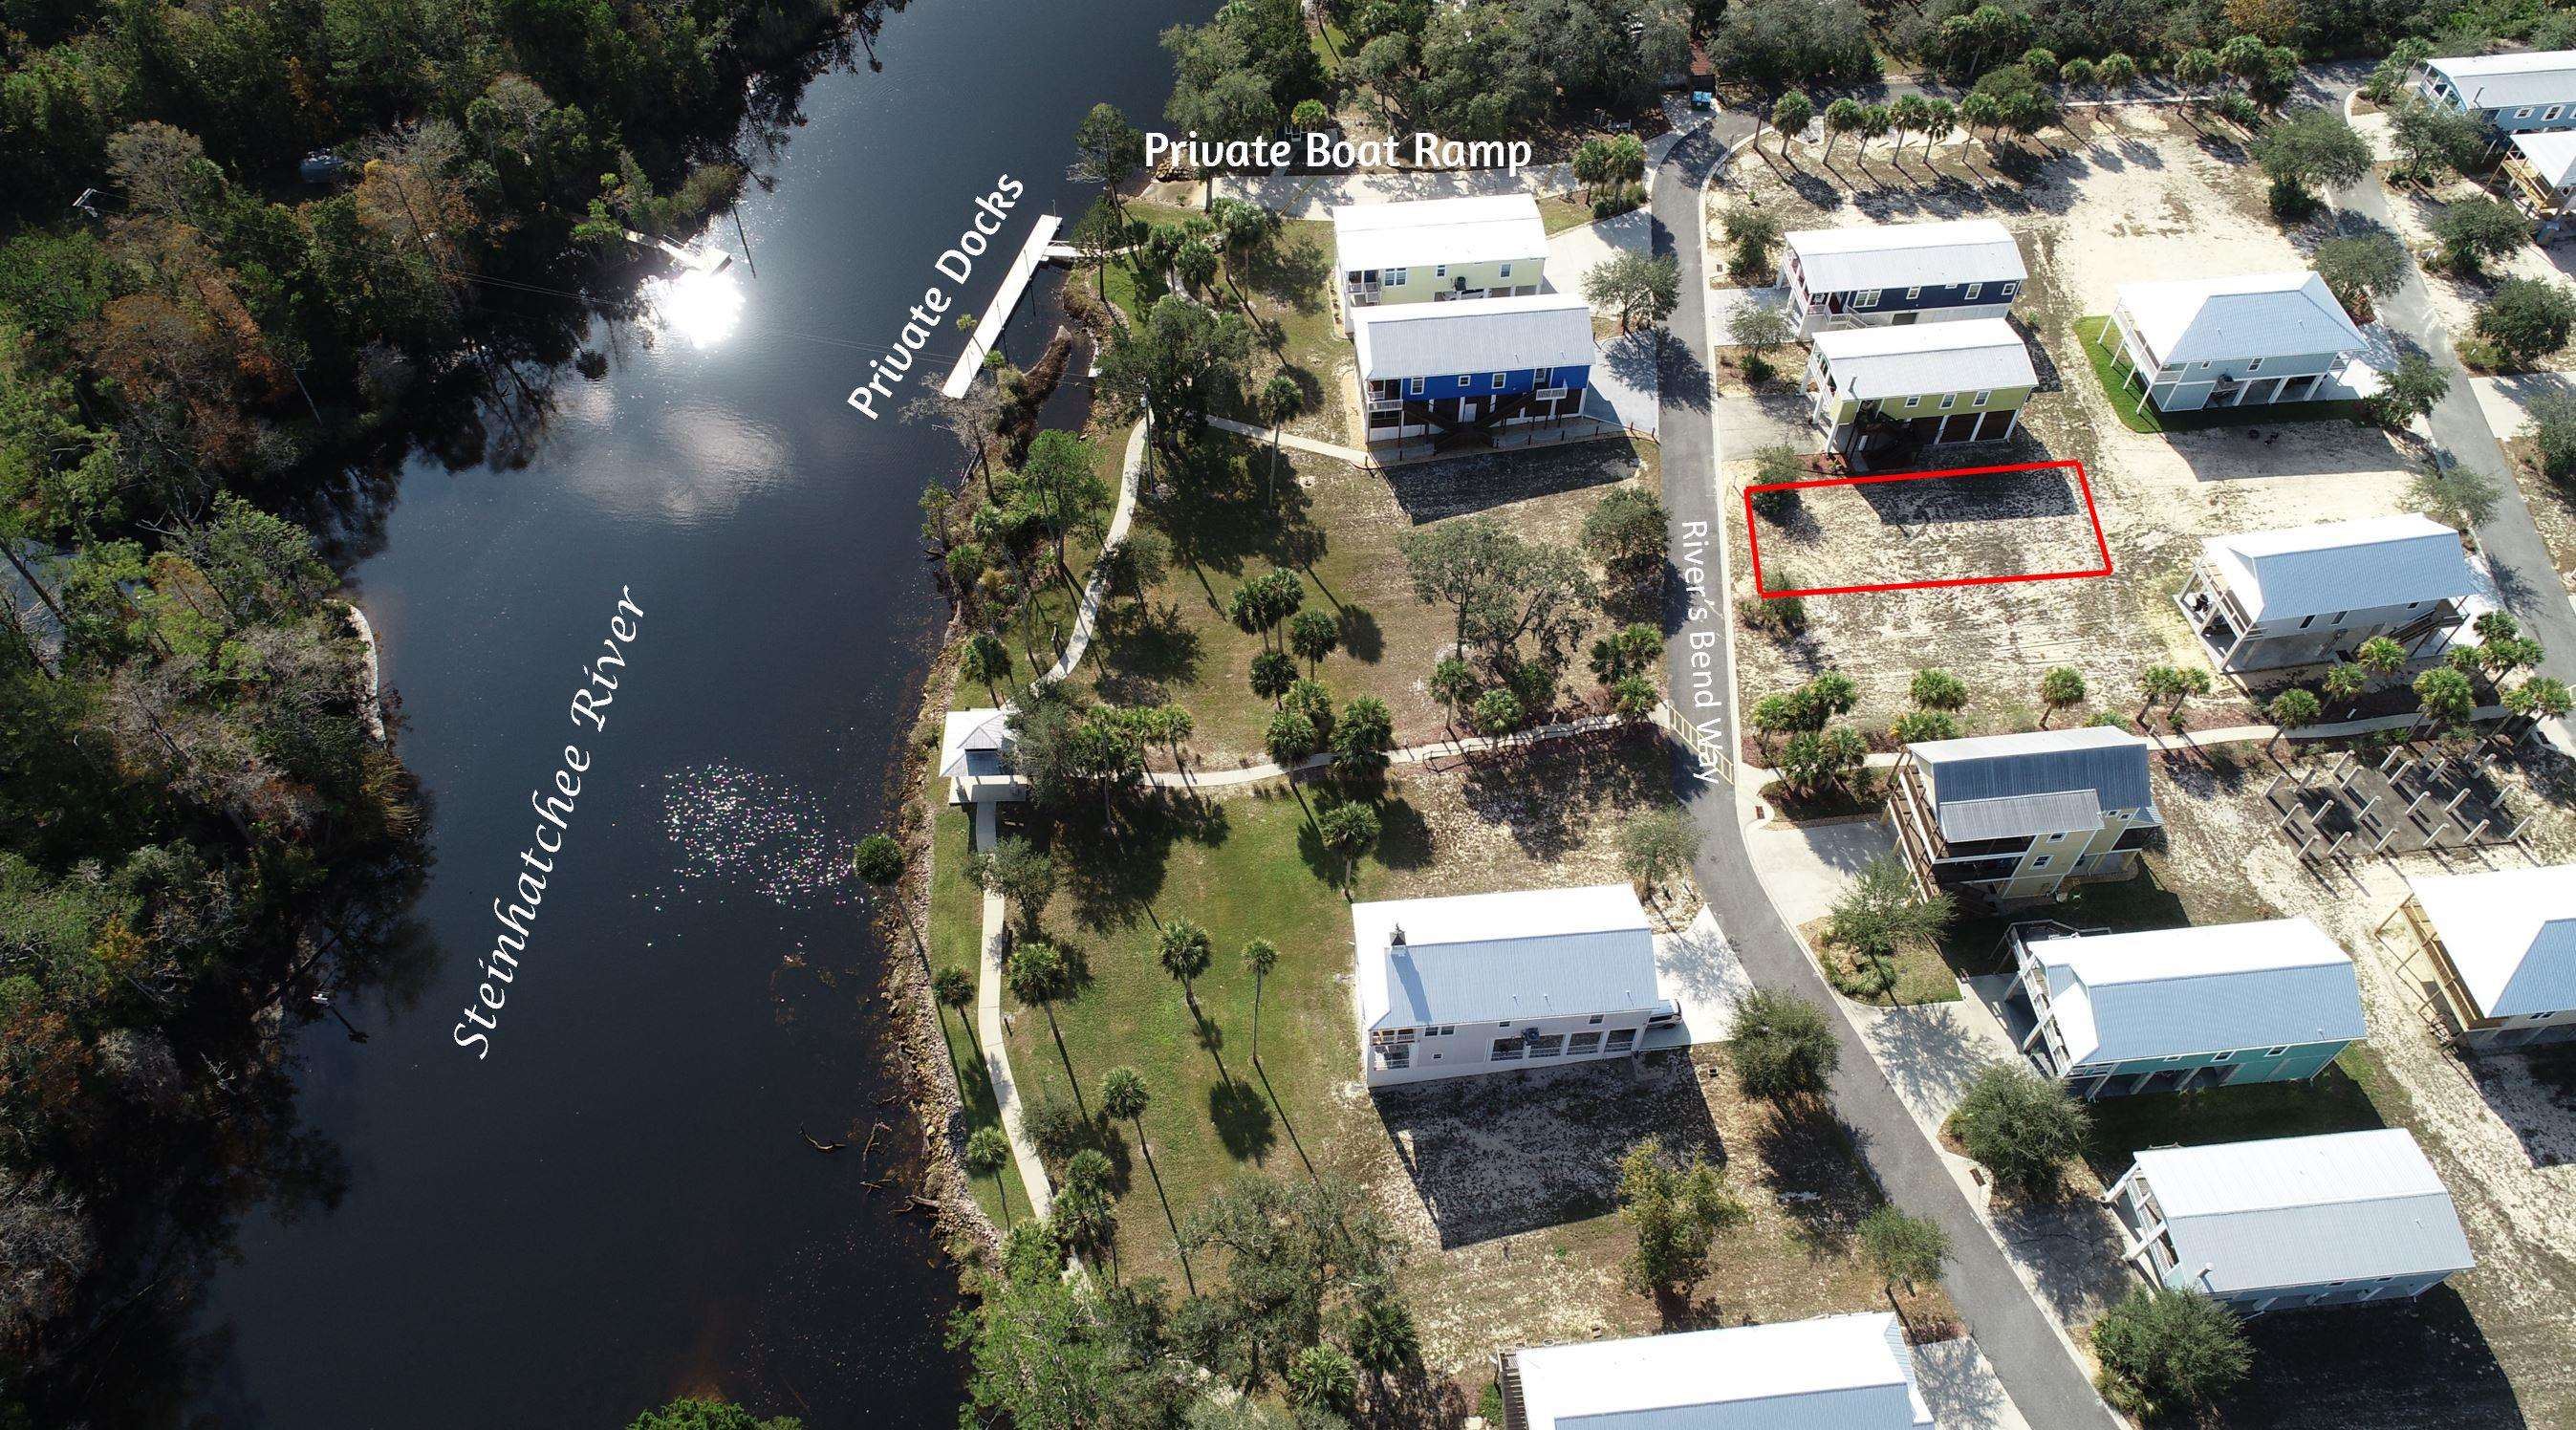 0 Rivers Bend,STEINHATCHEE,Florida 32359,Lots and land,Rivers Bend,368258